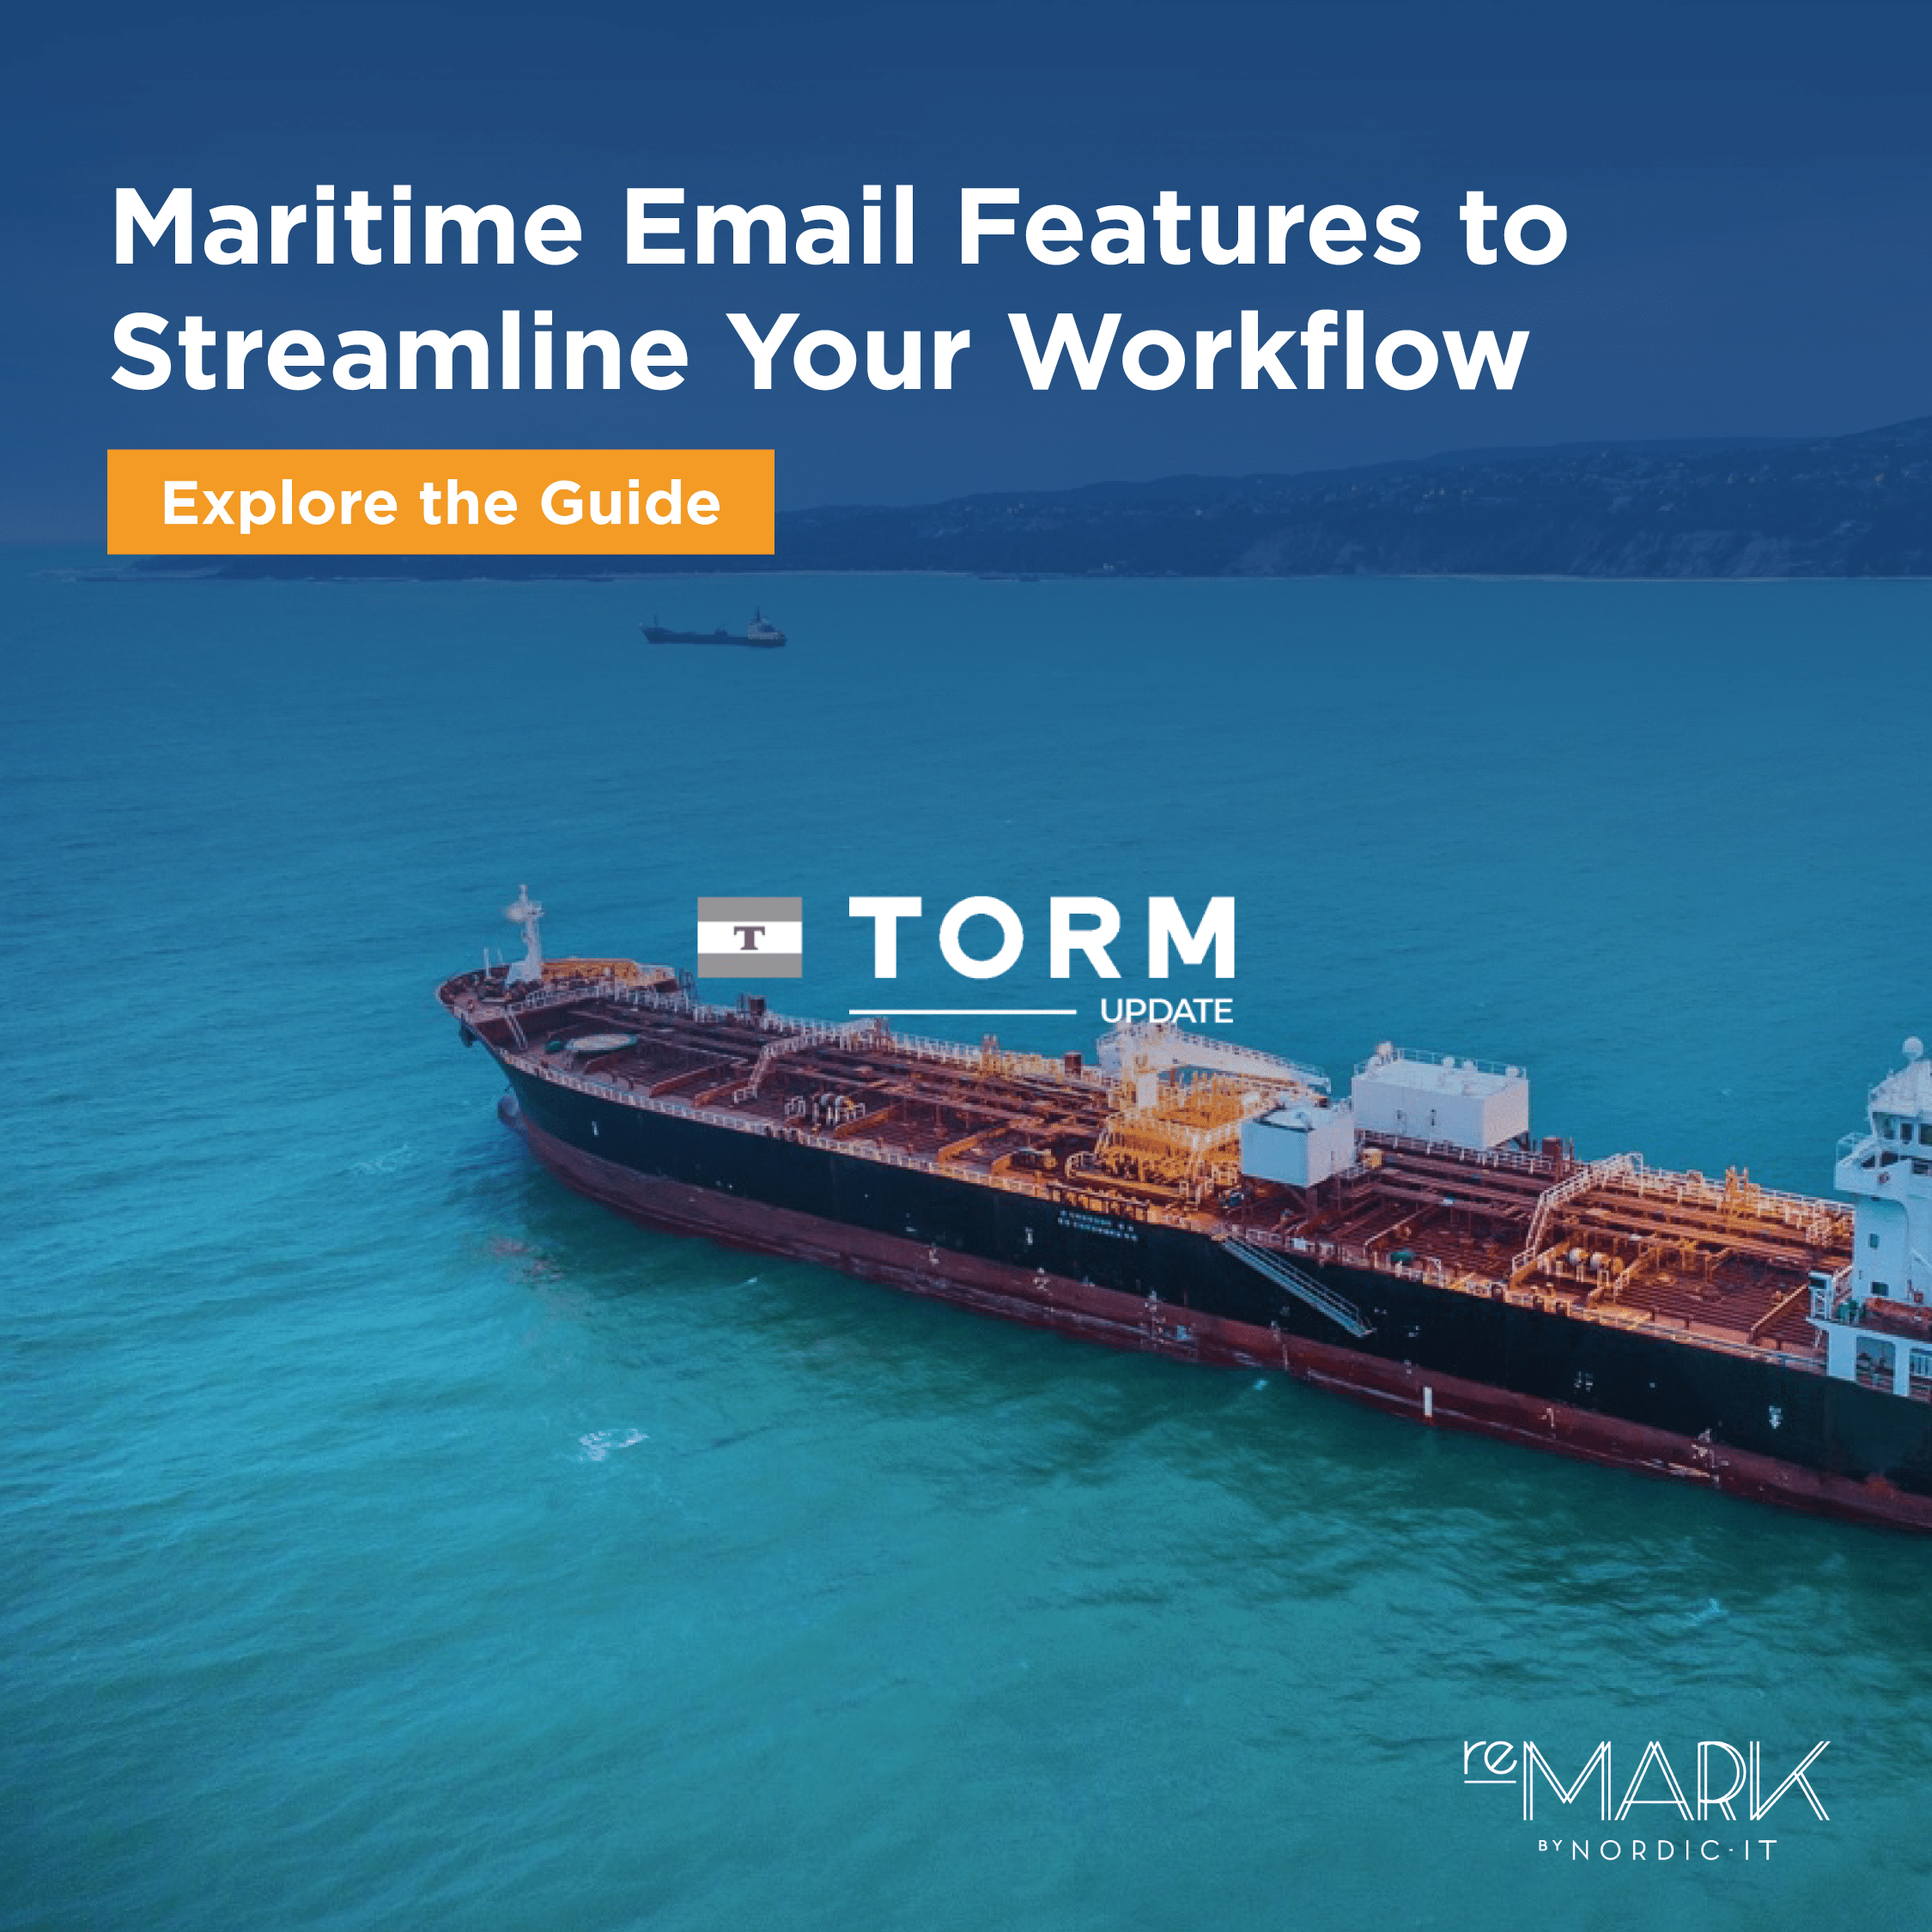 View our guide to see Maritime Email Features that Streamlines Your Workflow